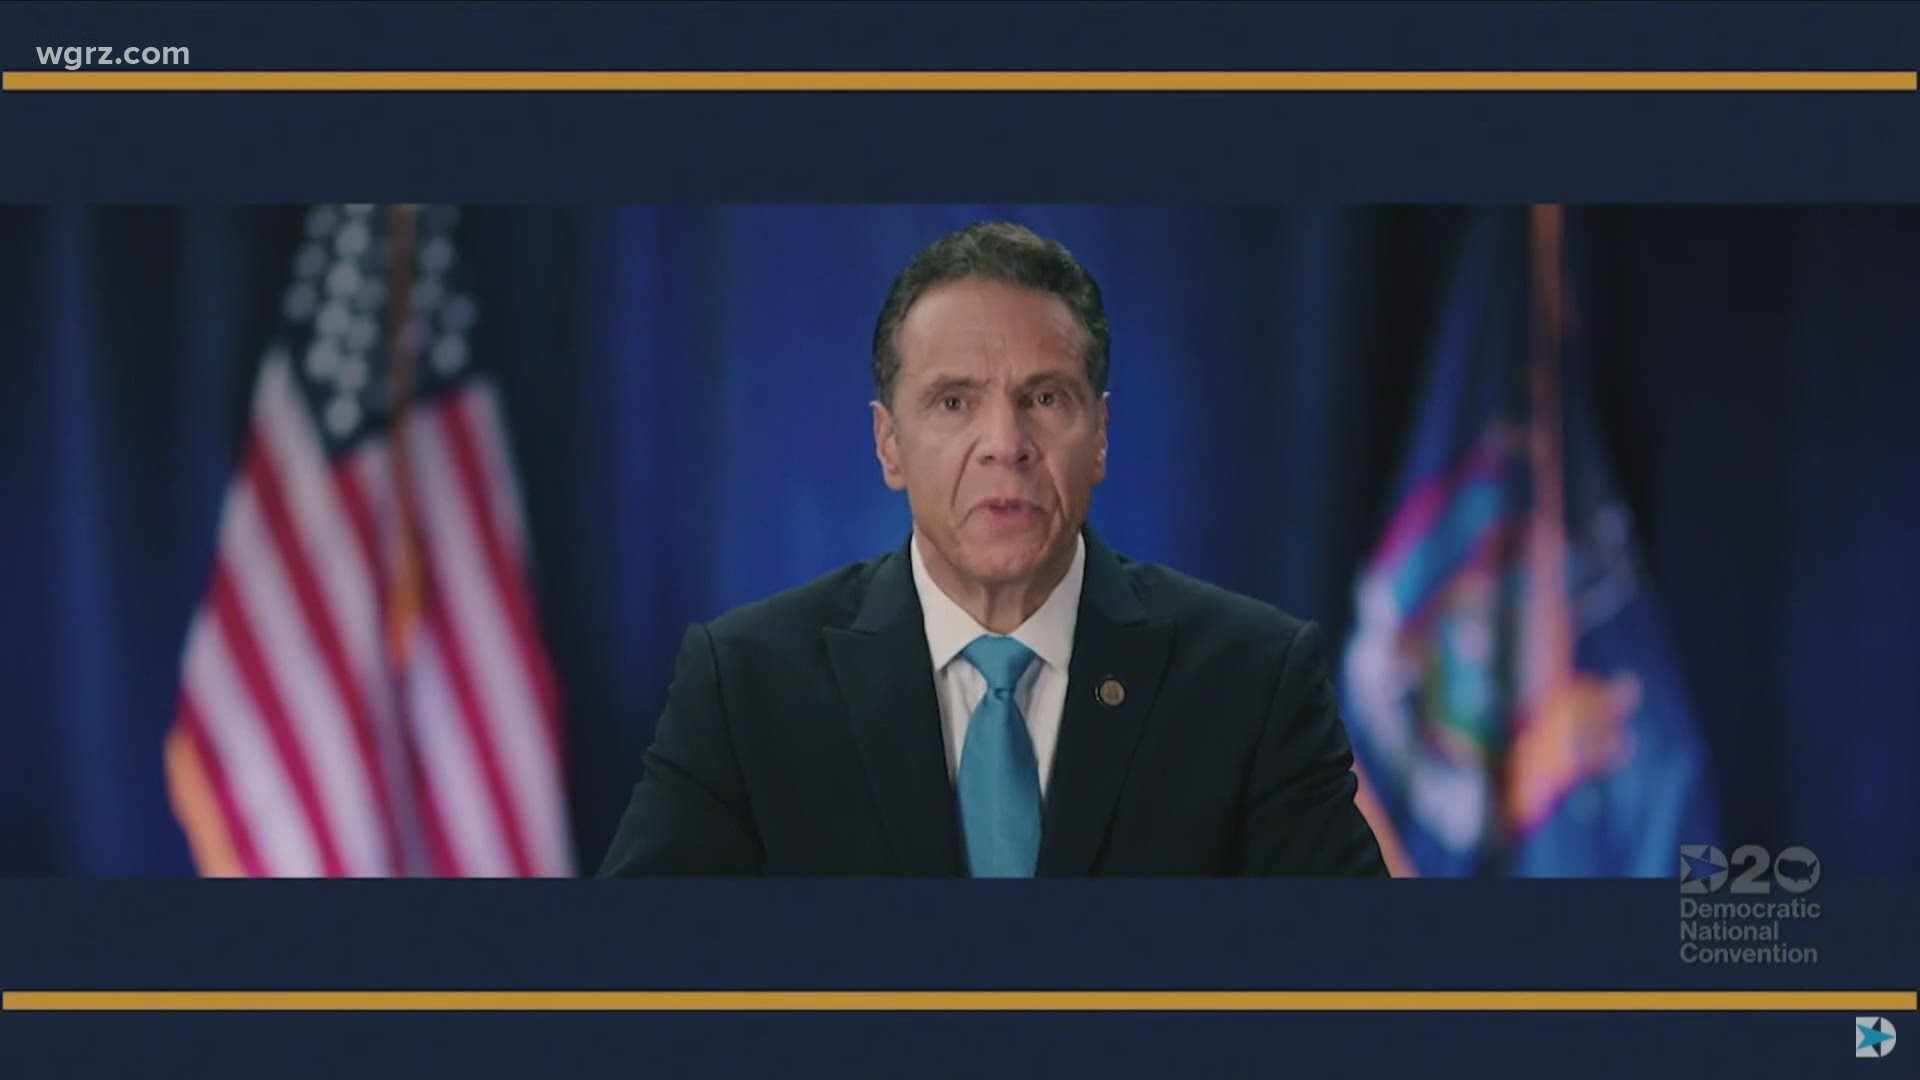 The governor touted New York State's low Coronavirus infection rate in his speech during the virtual event.